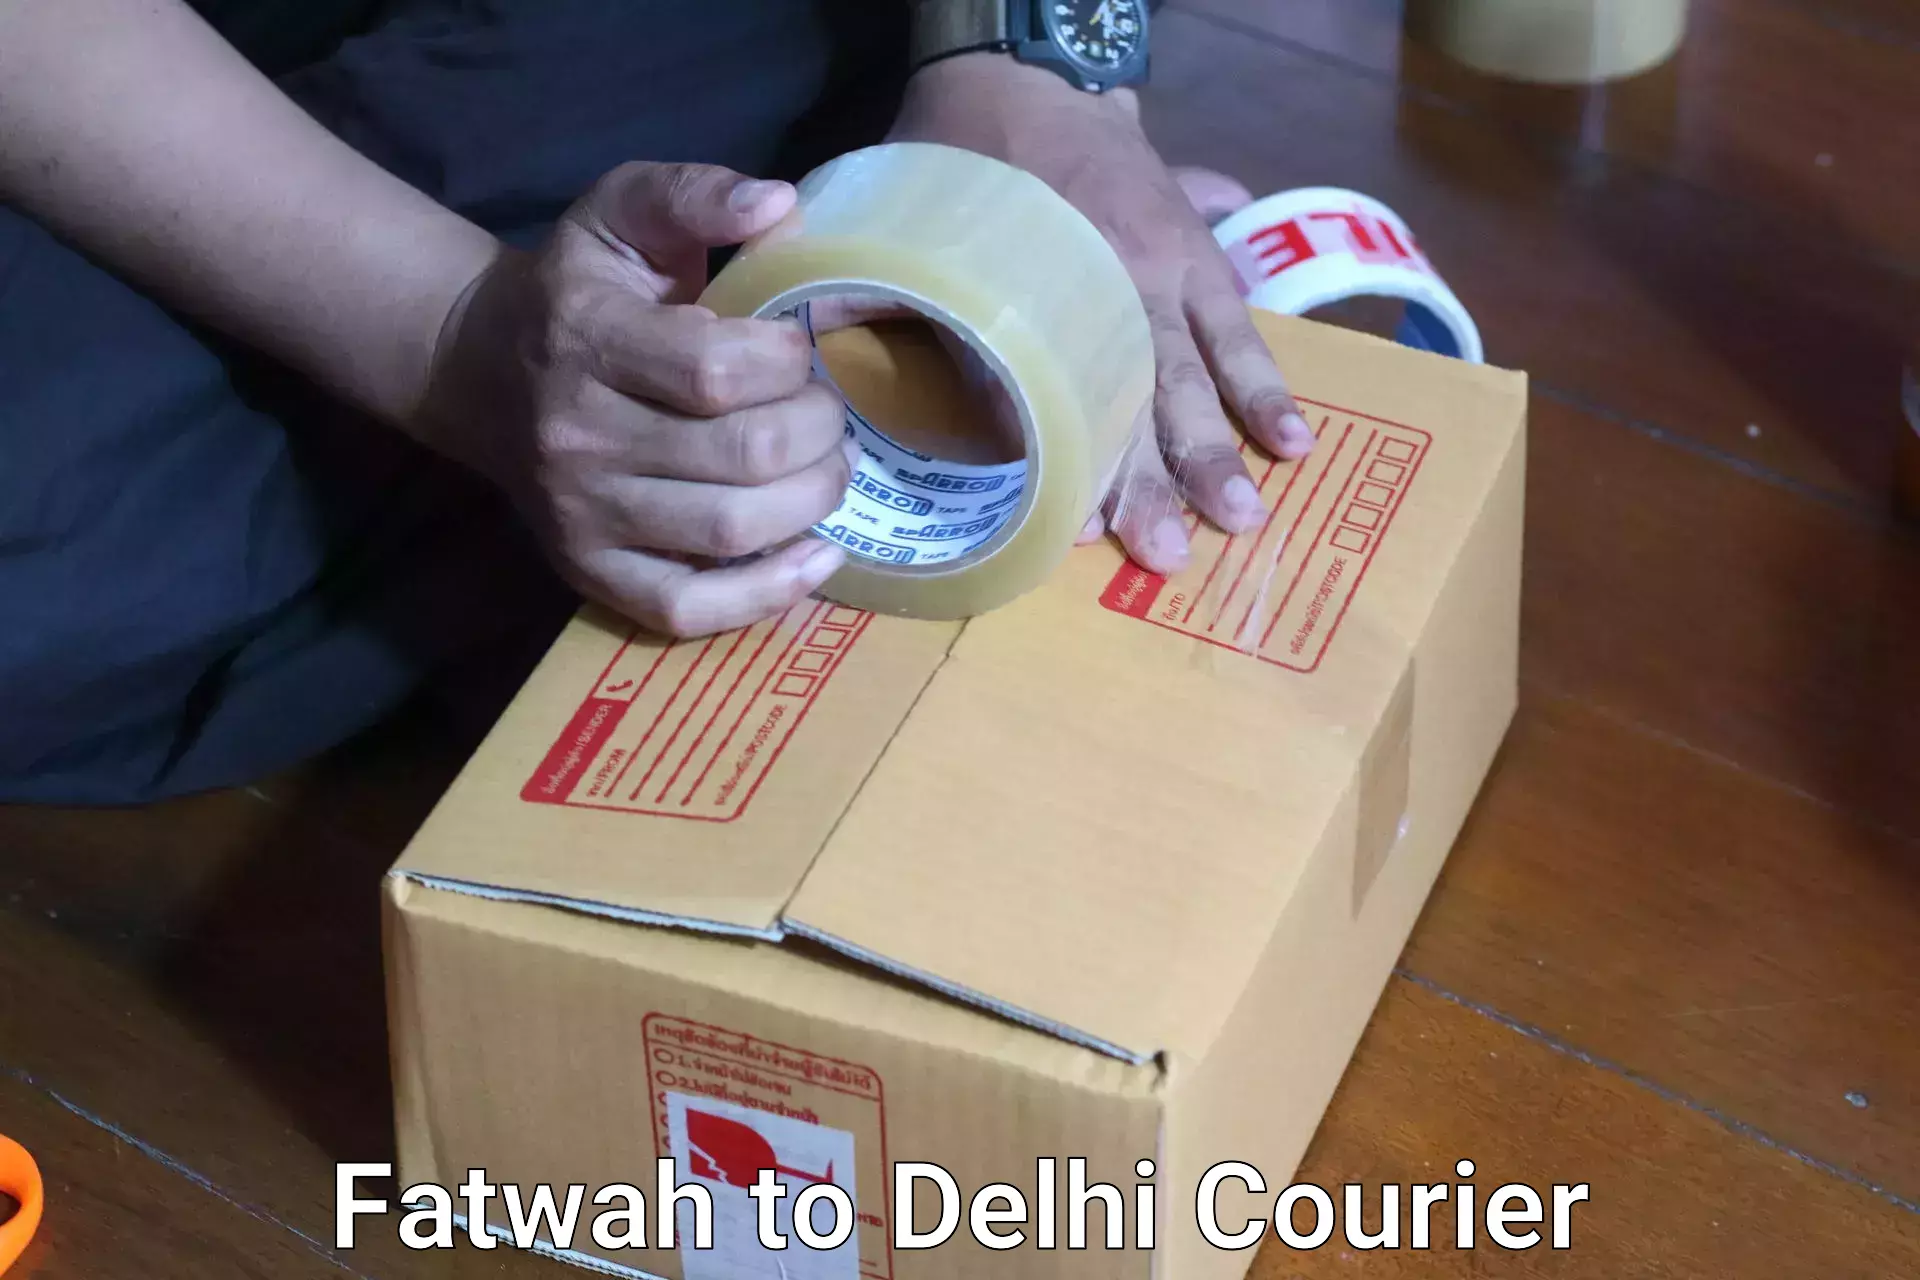 Luggage delivery logistics in Fatwah to Kalkaji